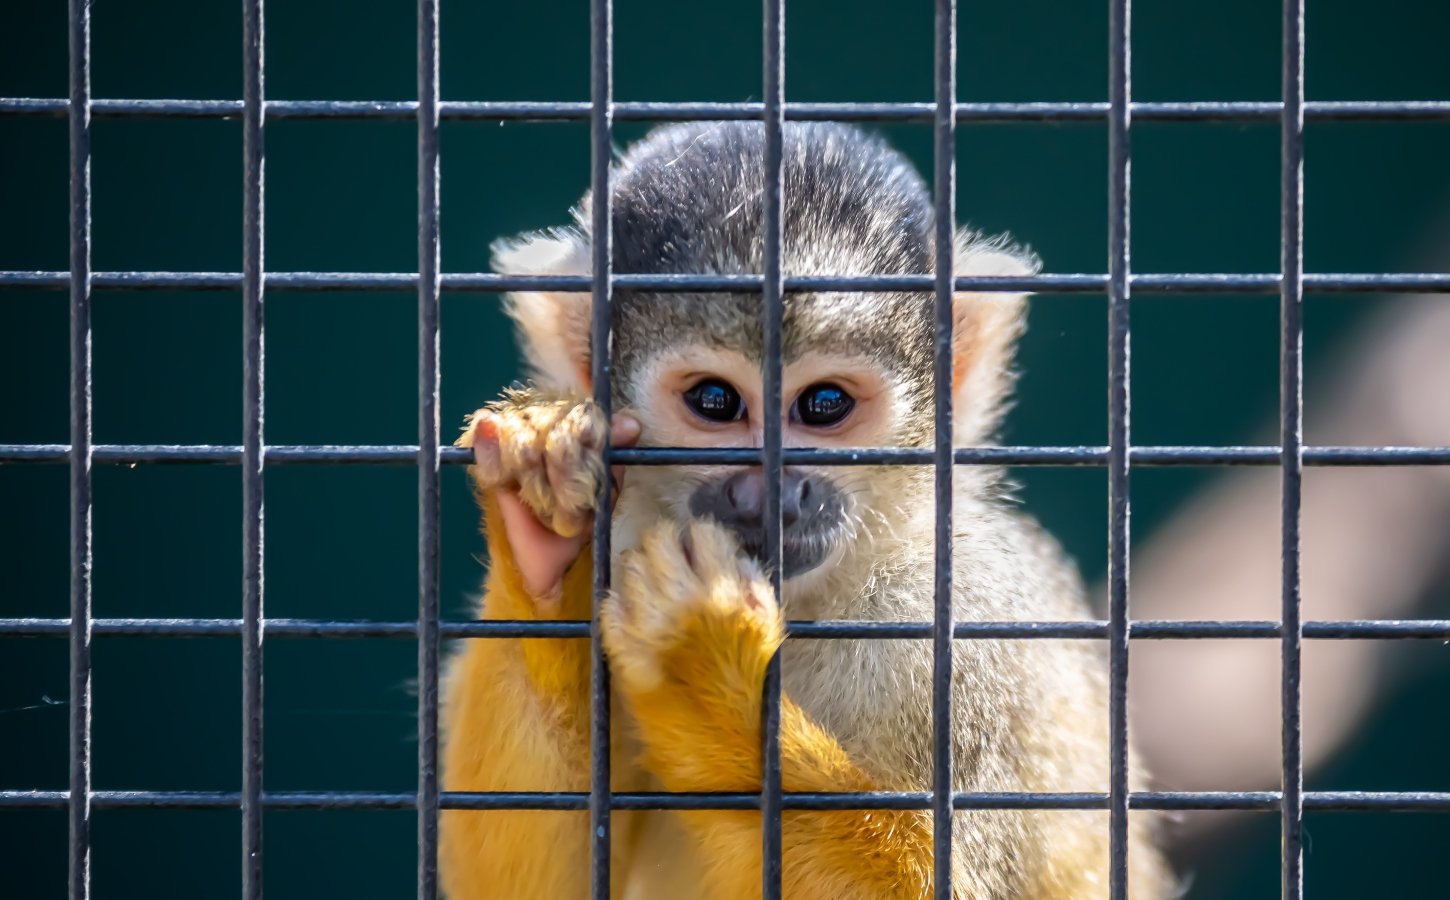 caged squirrel monkey in a zoo